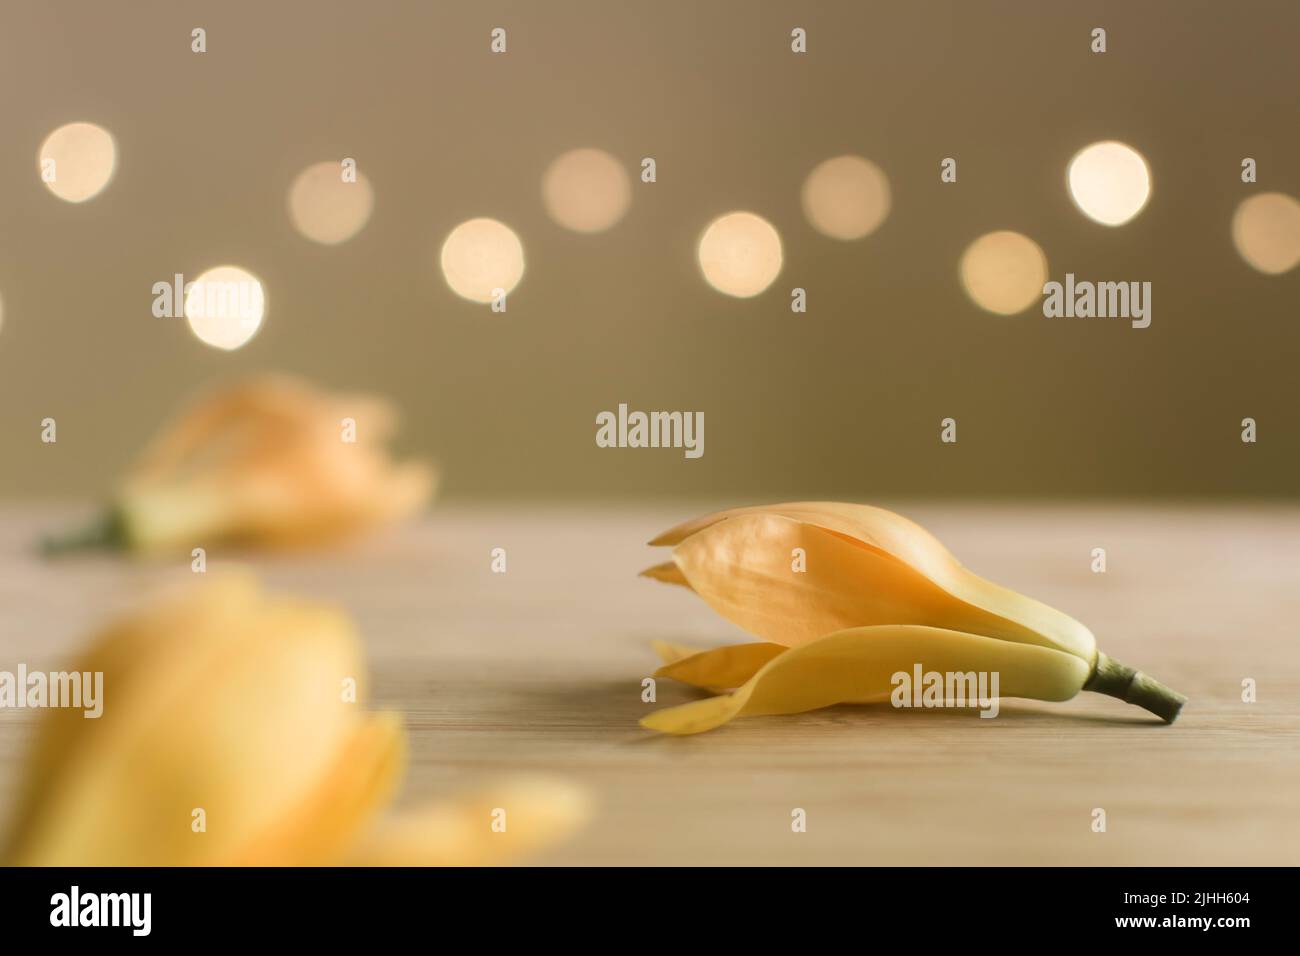 Son champa flowers also known as Champak or Golden champa on the wooden surface with bokeh at background. Stock Photo